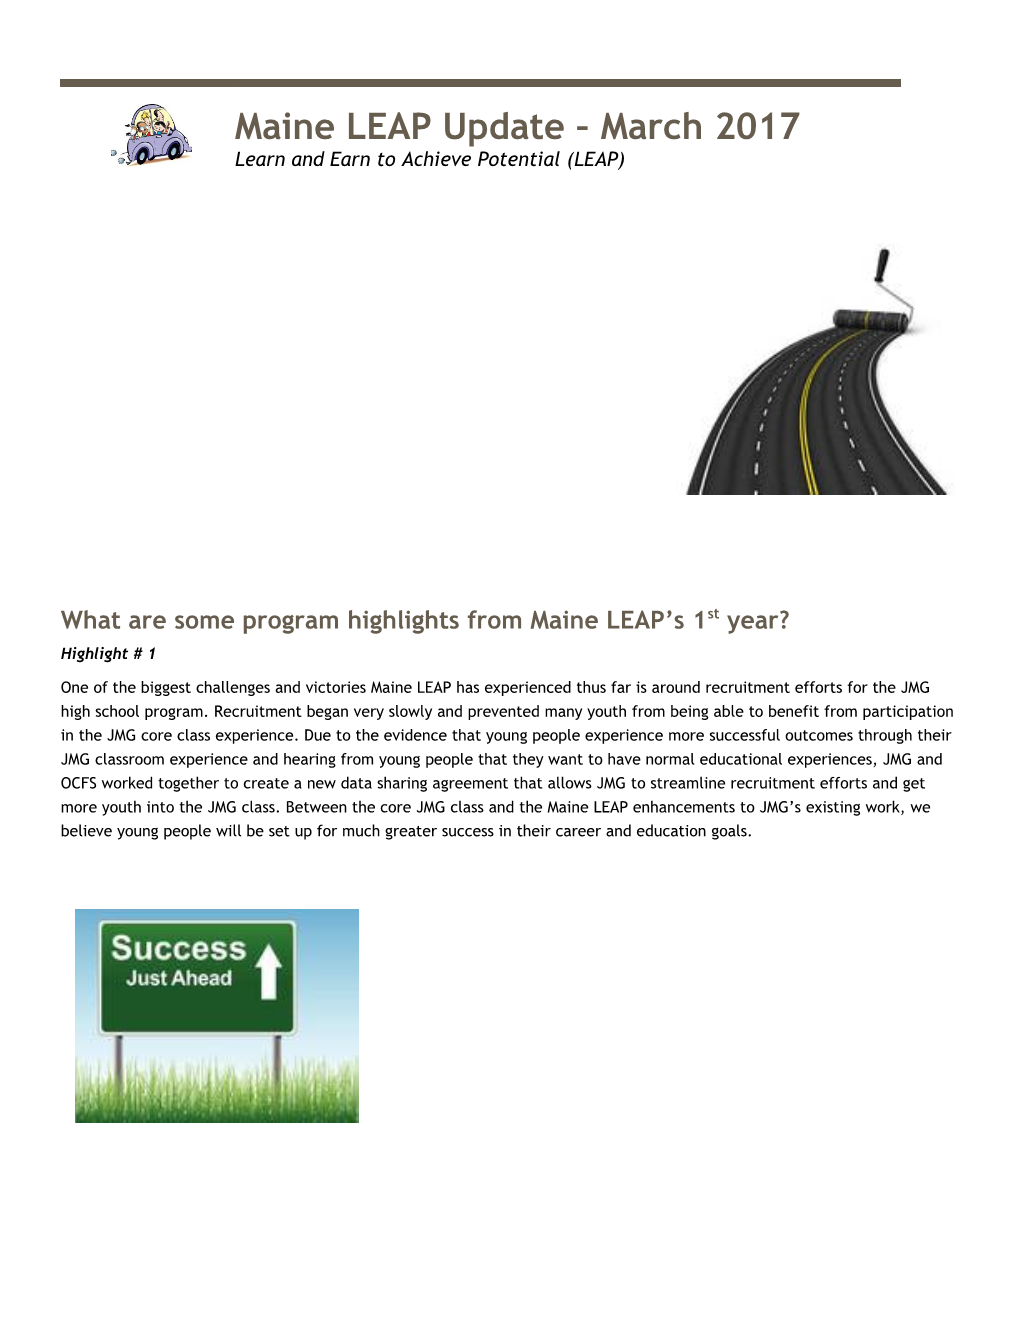 What Are Some Program Highlights from Maine LEAP S 1St Year?